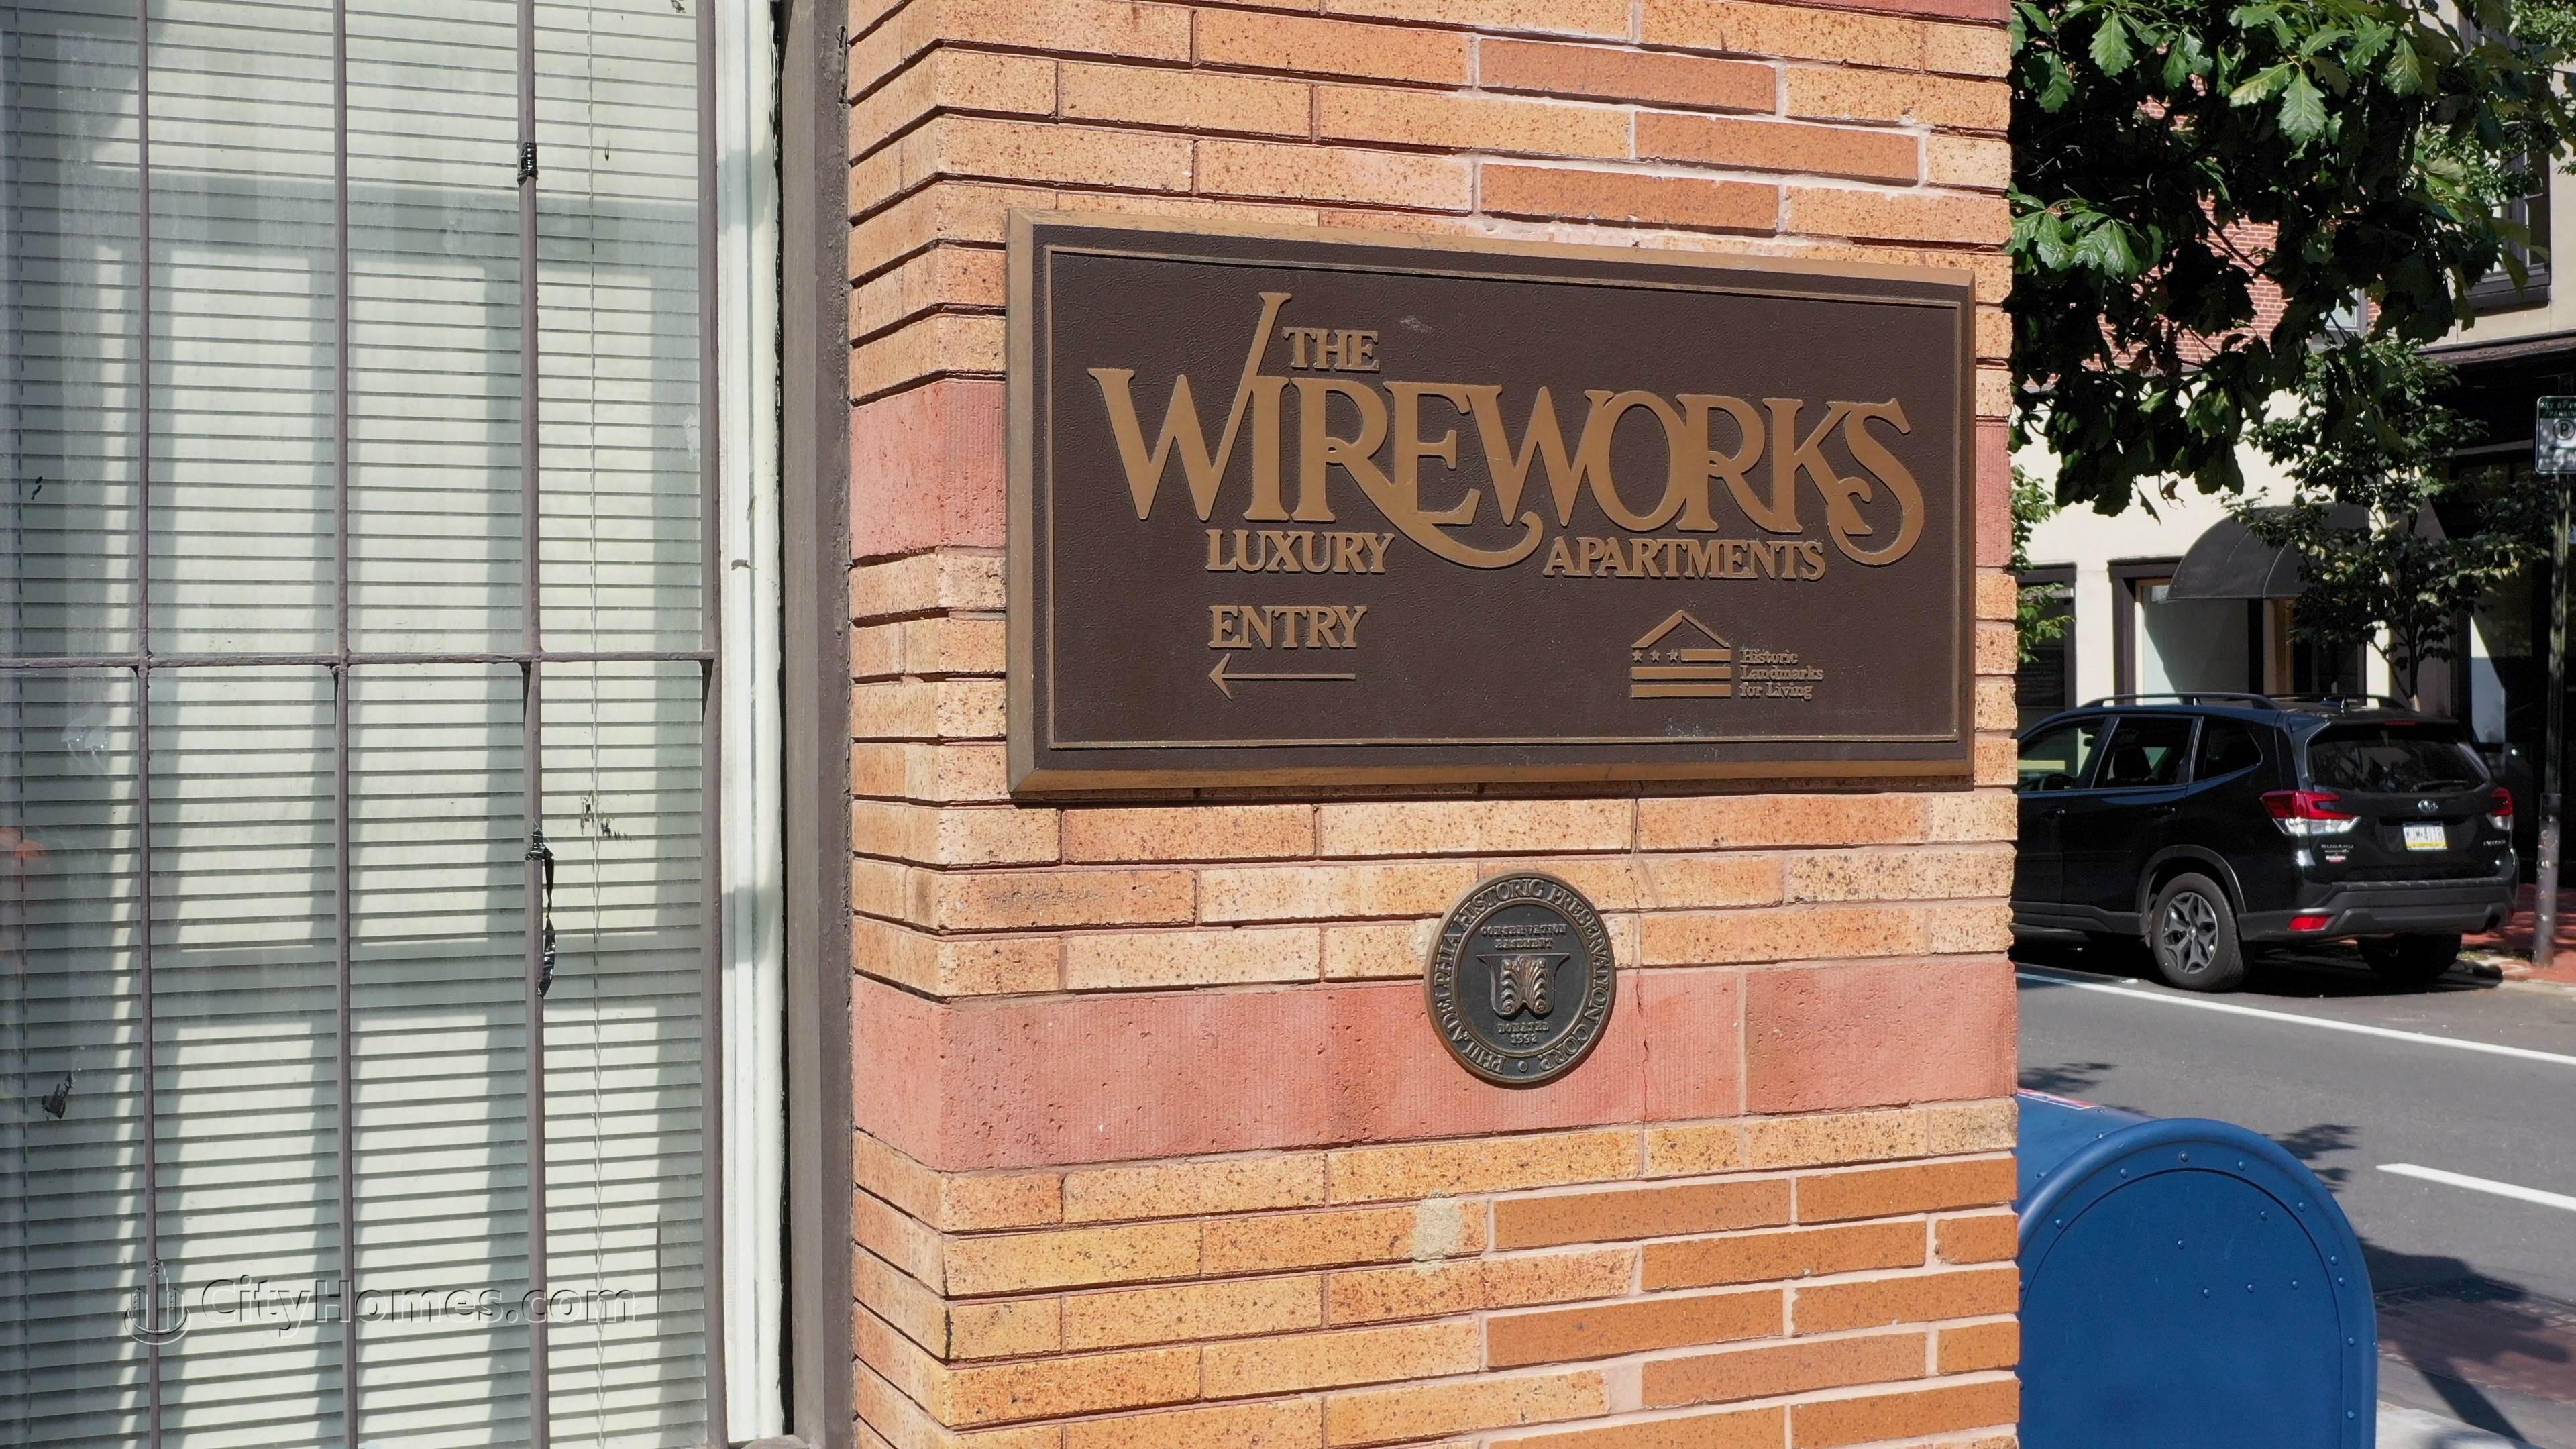 Wireworks building at 301 Race St, Old City, Philadelphia, PA 19106